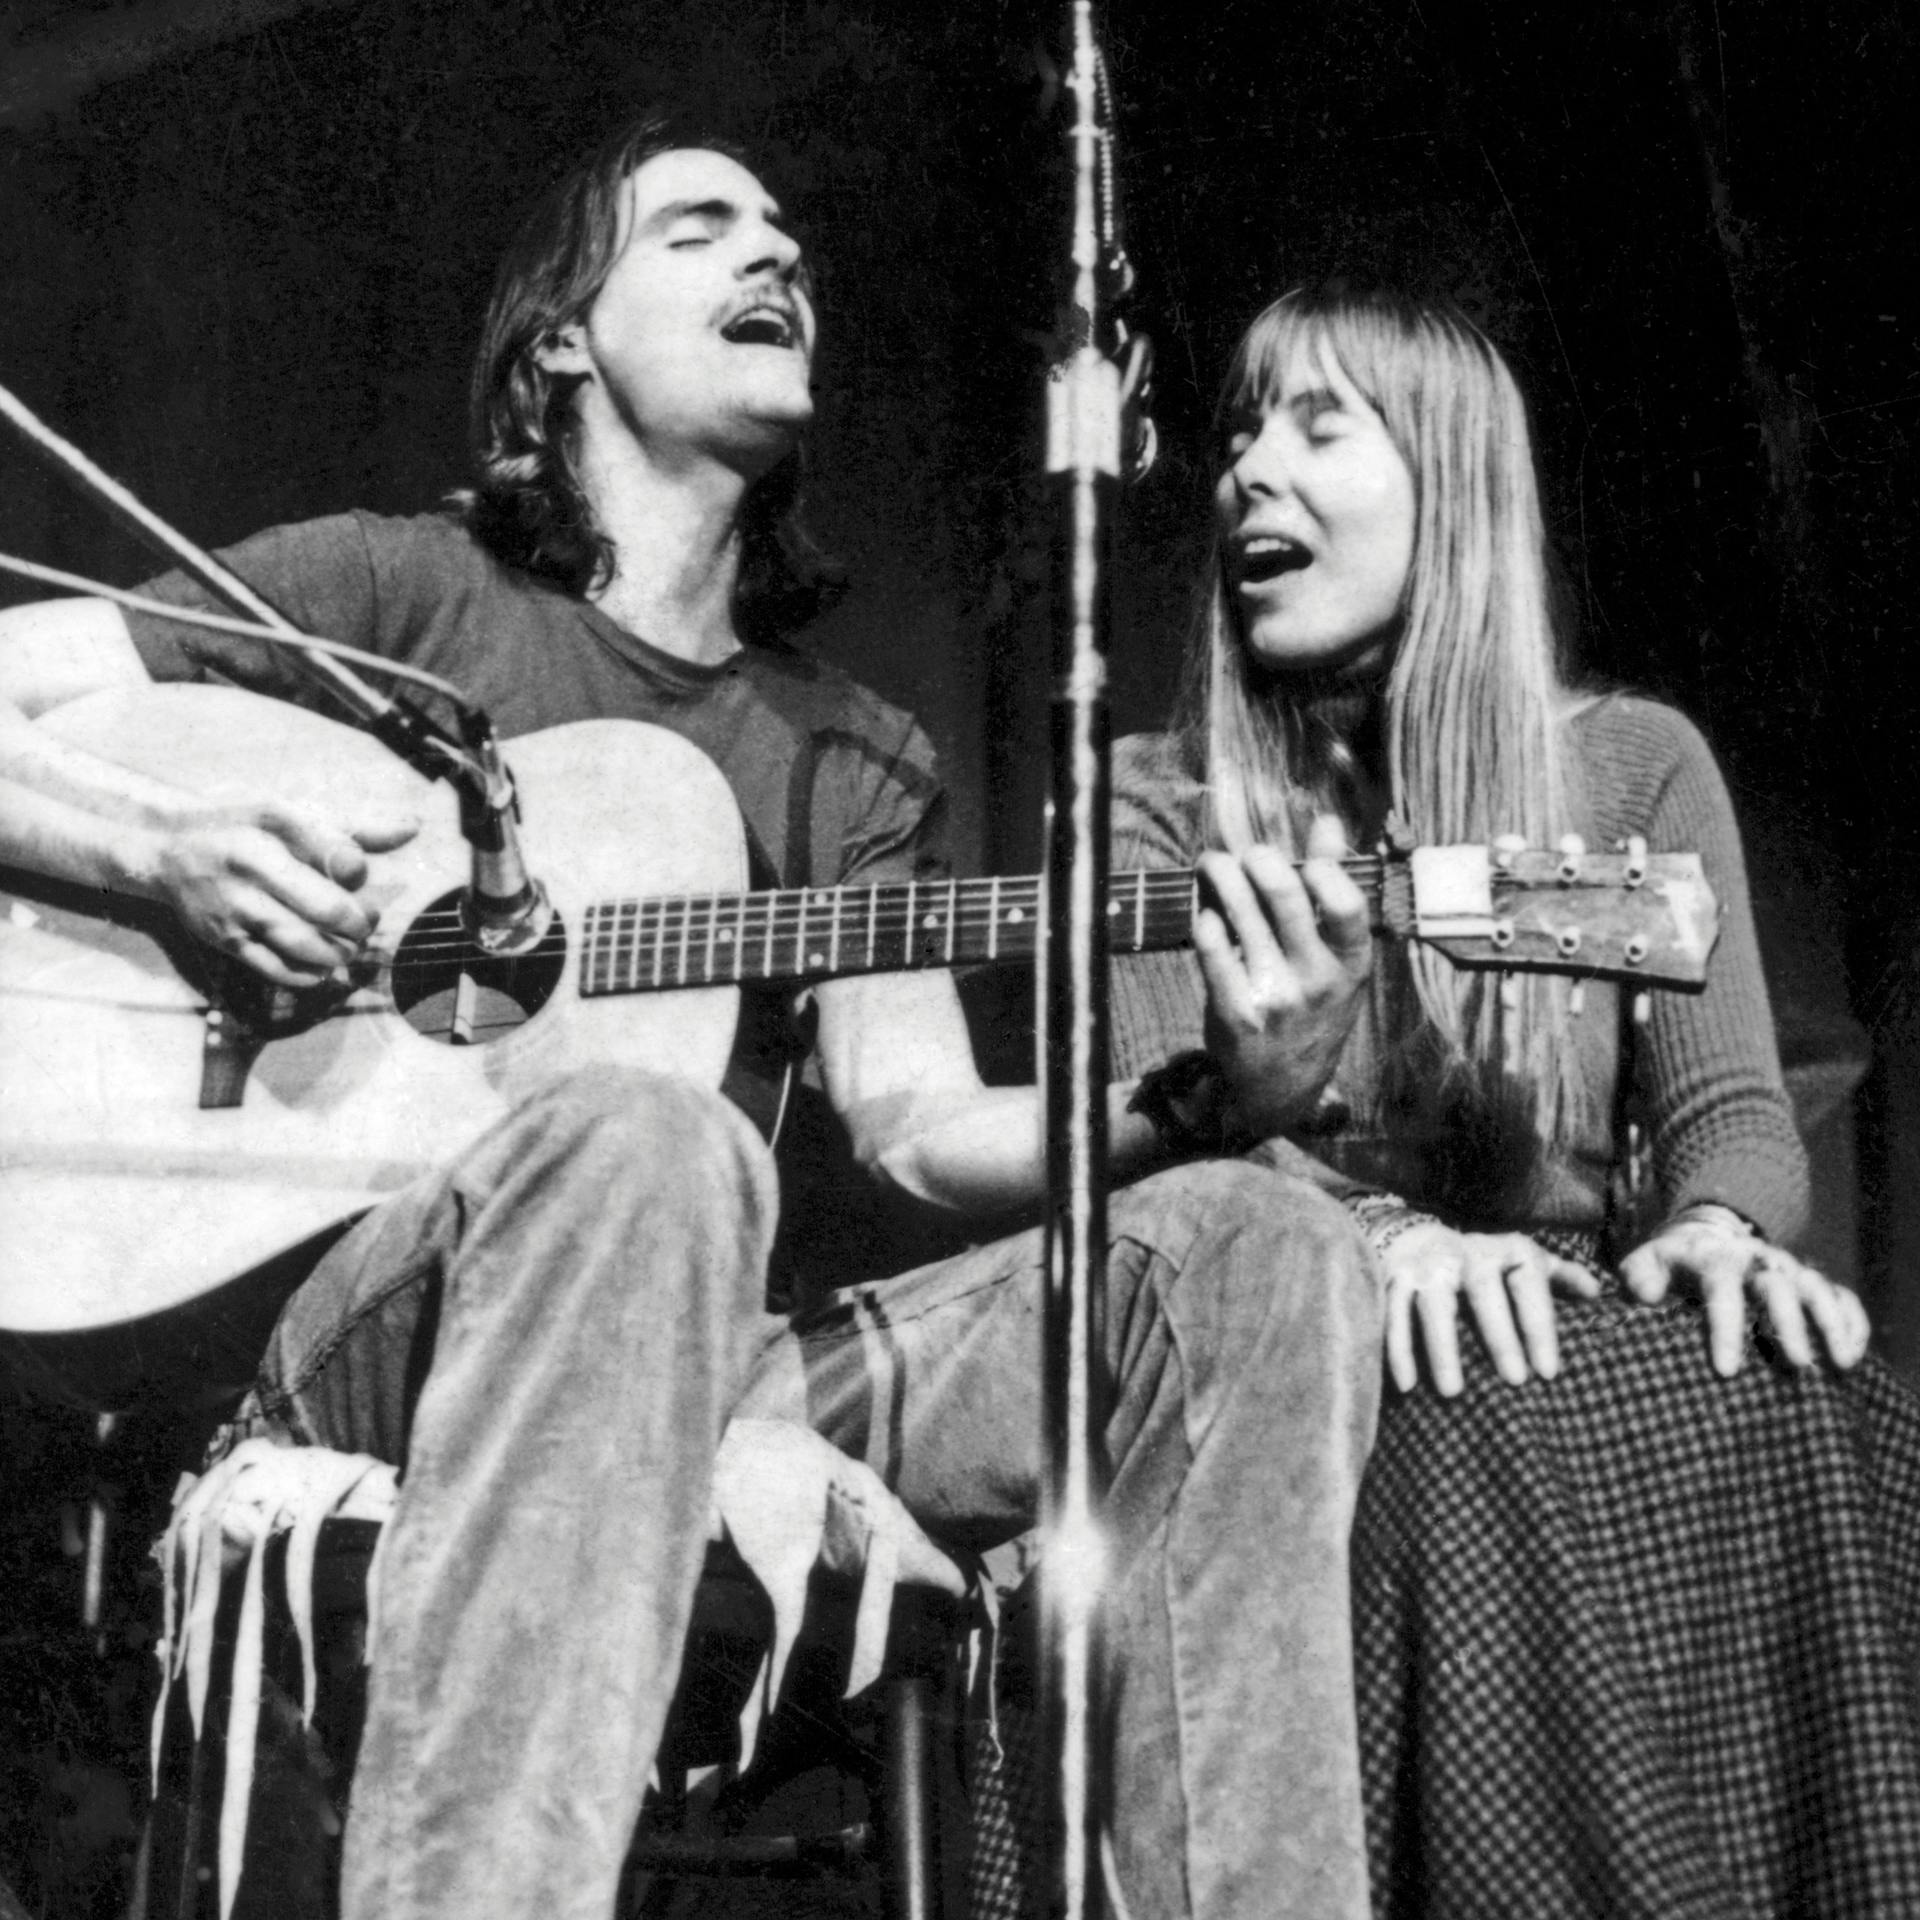 <p><span style="color: #999999; font-family: Montserrat, Helvetica, Arial, sans-serif; font-size: 16px; line-height: 24px;">A James Taylor concert at Queens College in 1970 closed with Joni Mitchell as a surprise guest</span></p>
